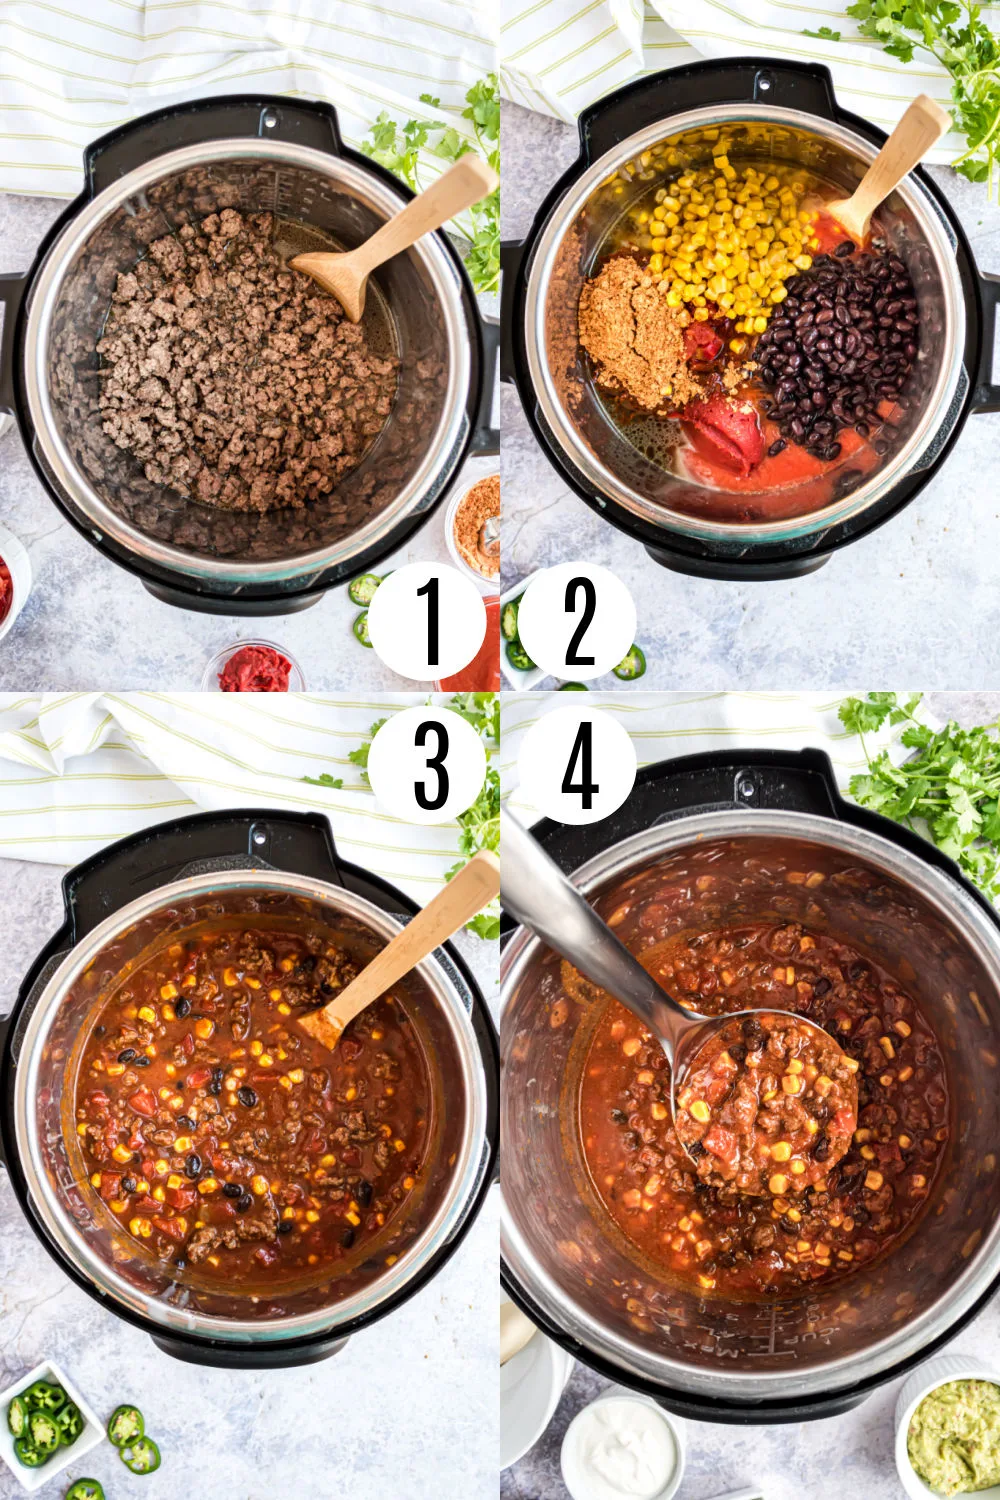 Step by step photos showing how to make taco chili in the pressure cooker.